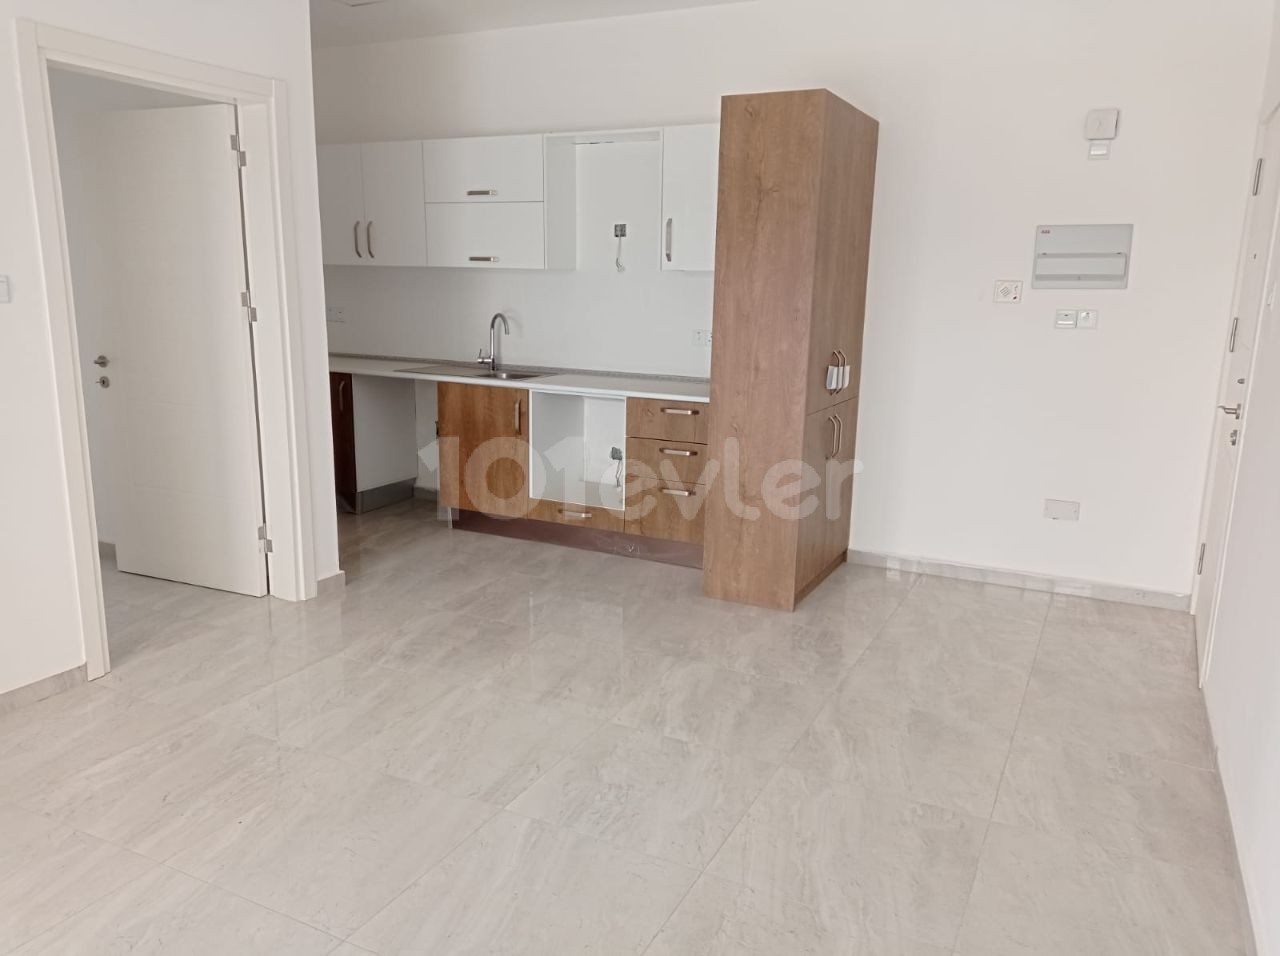 2 + 1 APARTMENTS FOR INVESTMENT FOR SALE IN THE CENTRAL LOCATION IN THE KYZYLBASH REGION ** 